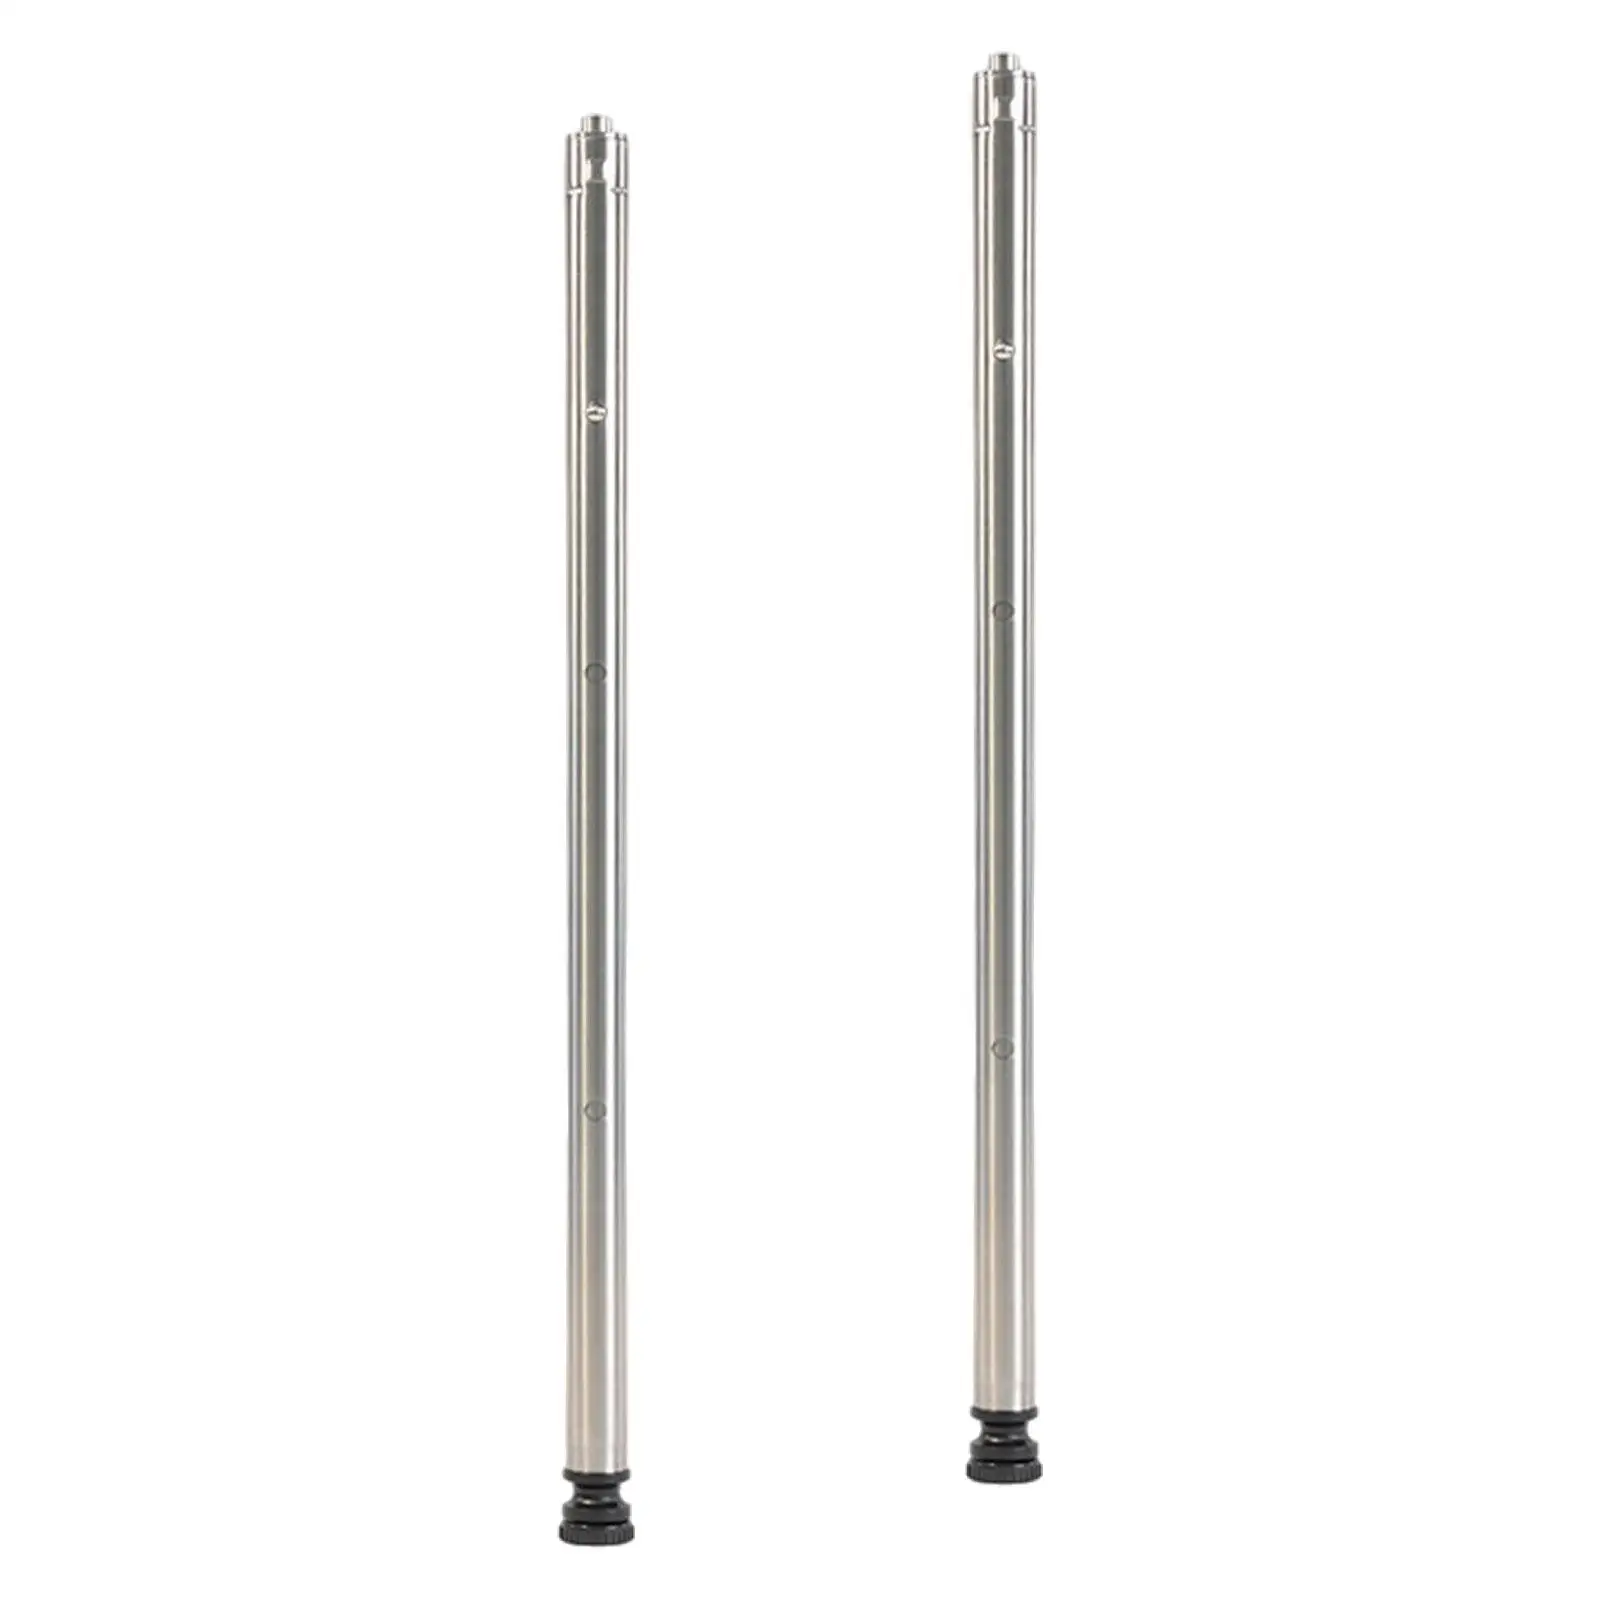 2 Pieces Camping Table Legs Telescopic Compact Furniture Legs Hardware Easy to Install Outdoor Travel Accessories Leg Brackets